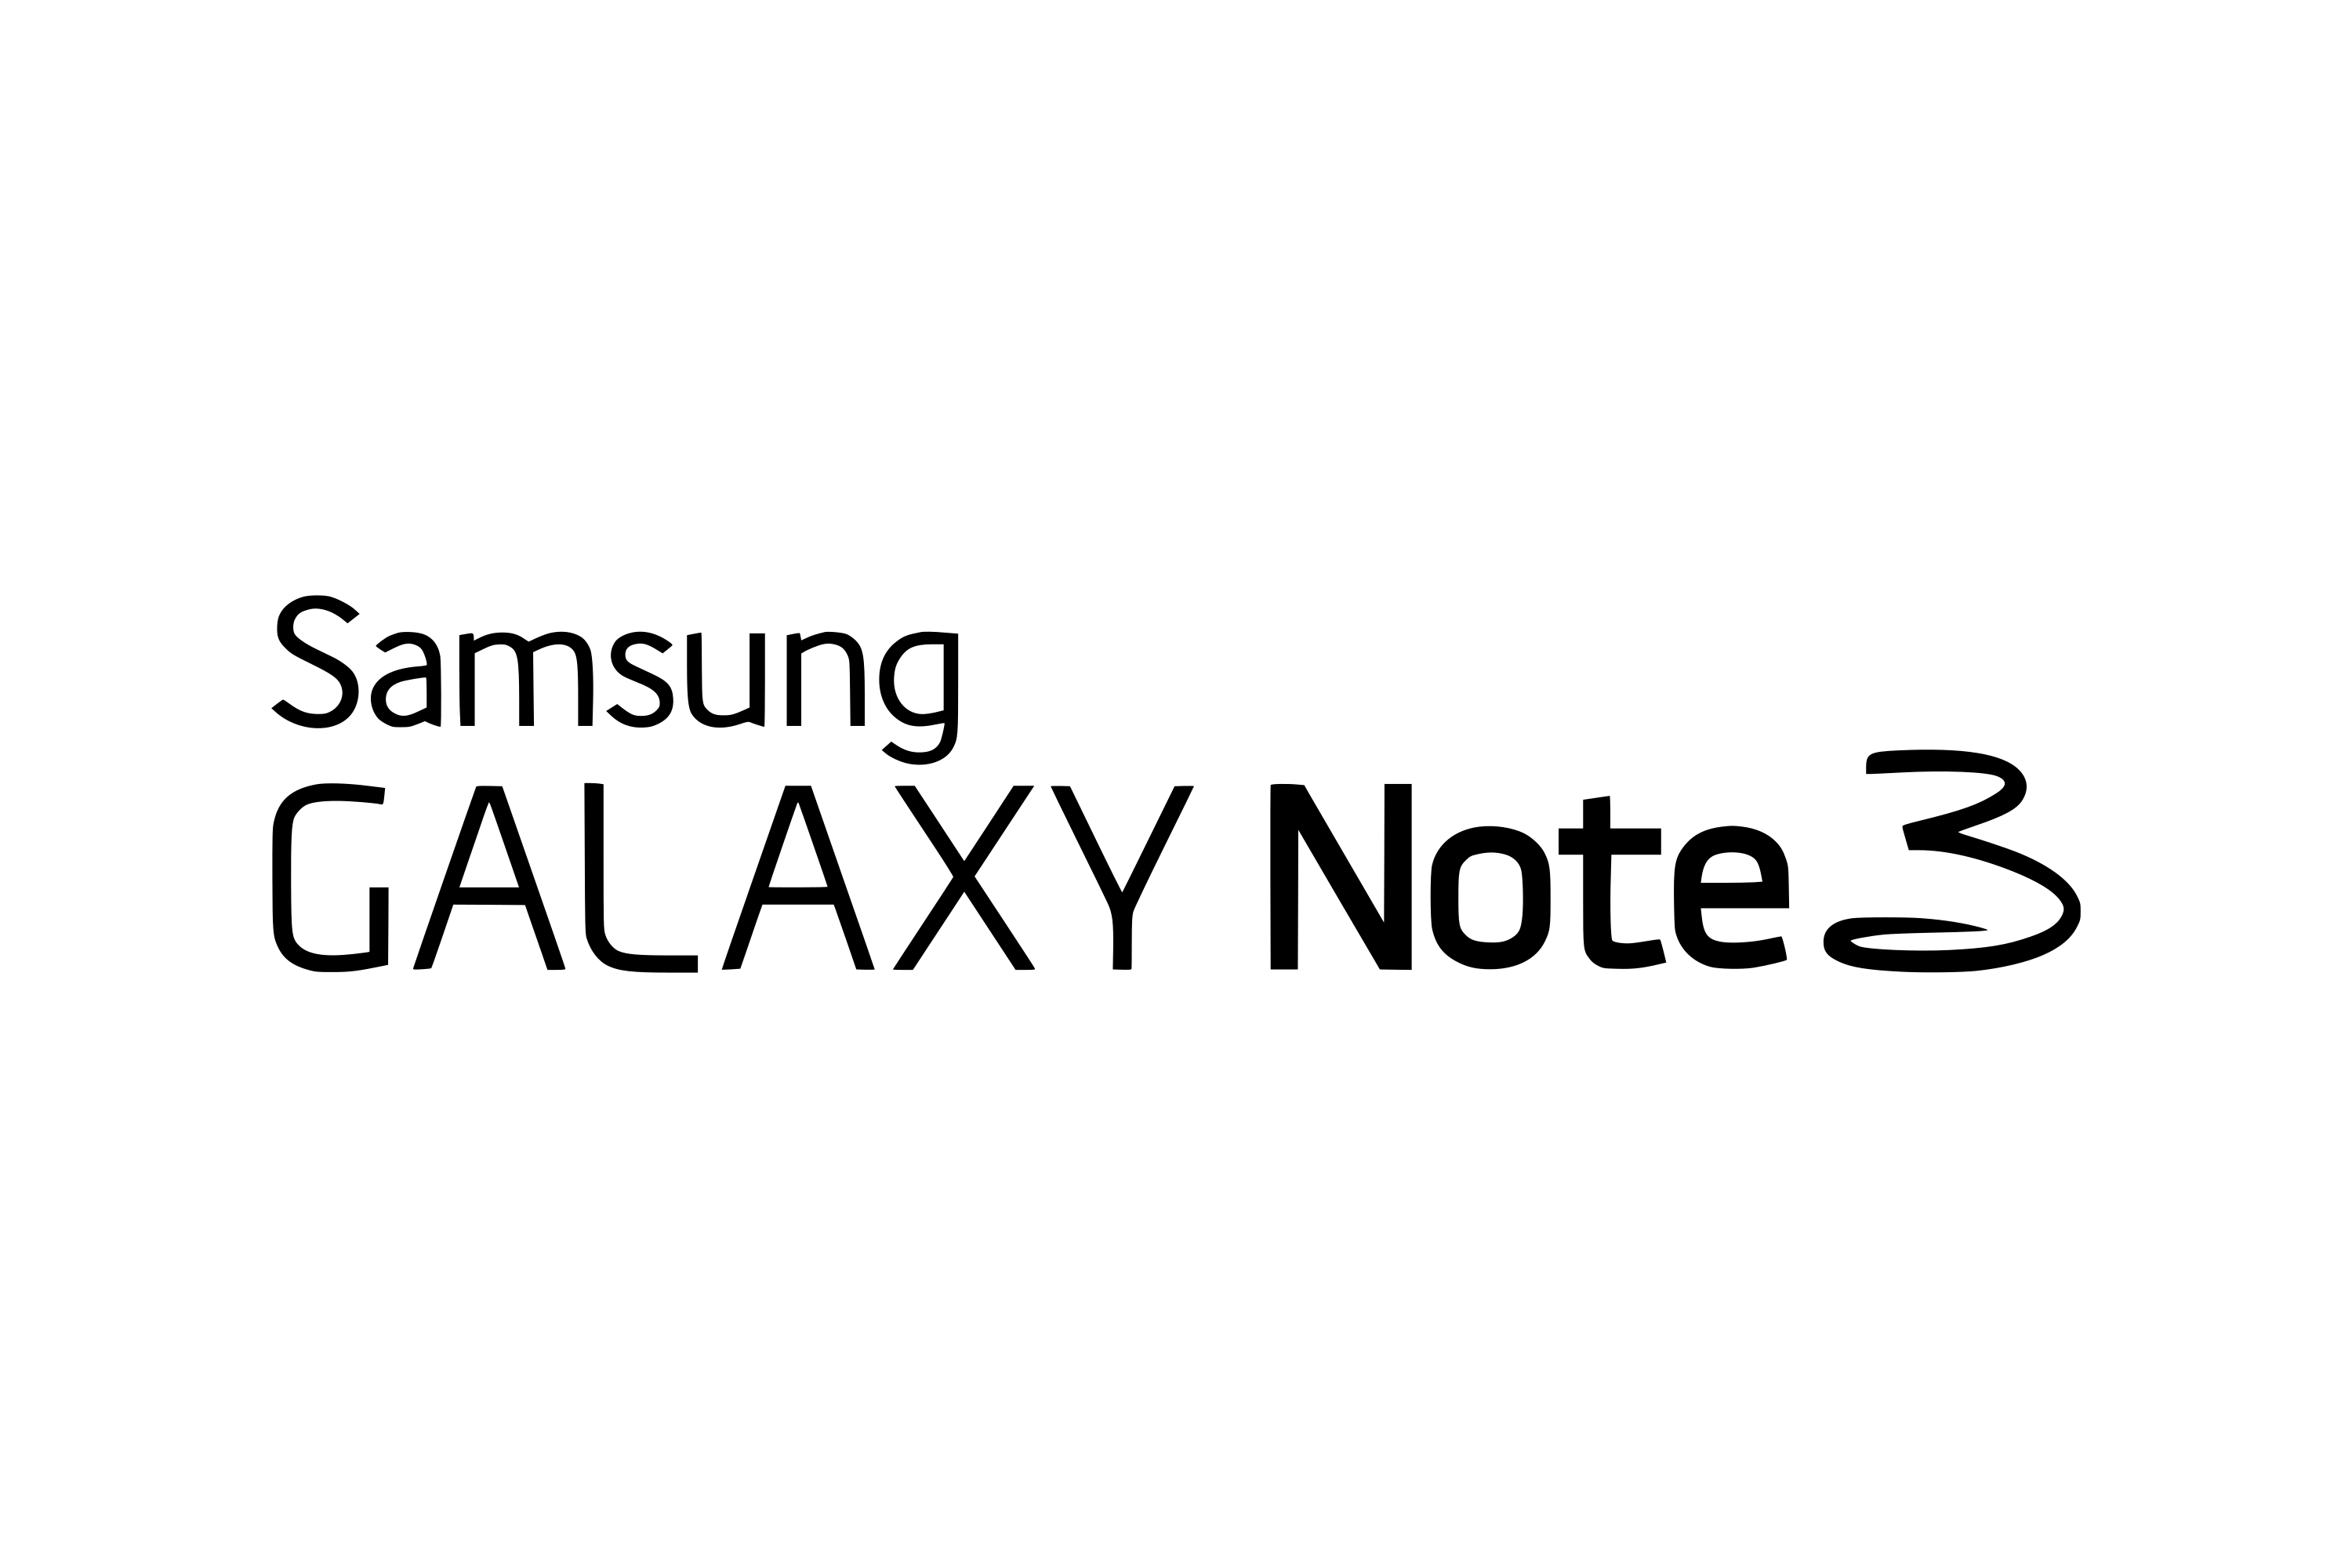 Download Samsung Galaxy Note 3 Logo in SVG Vector or PNG File Format